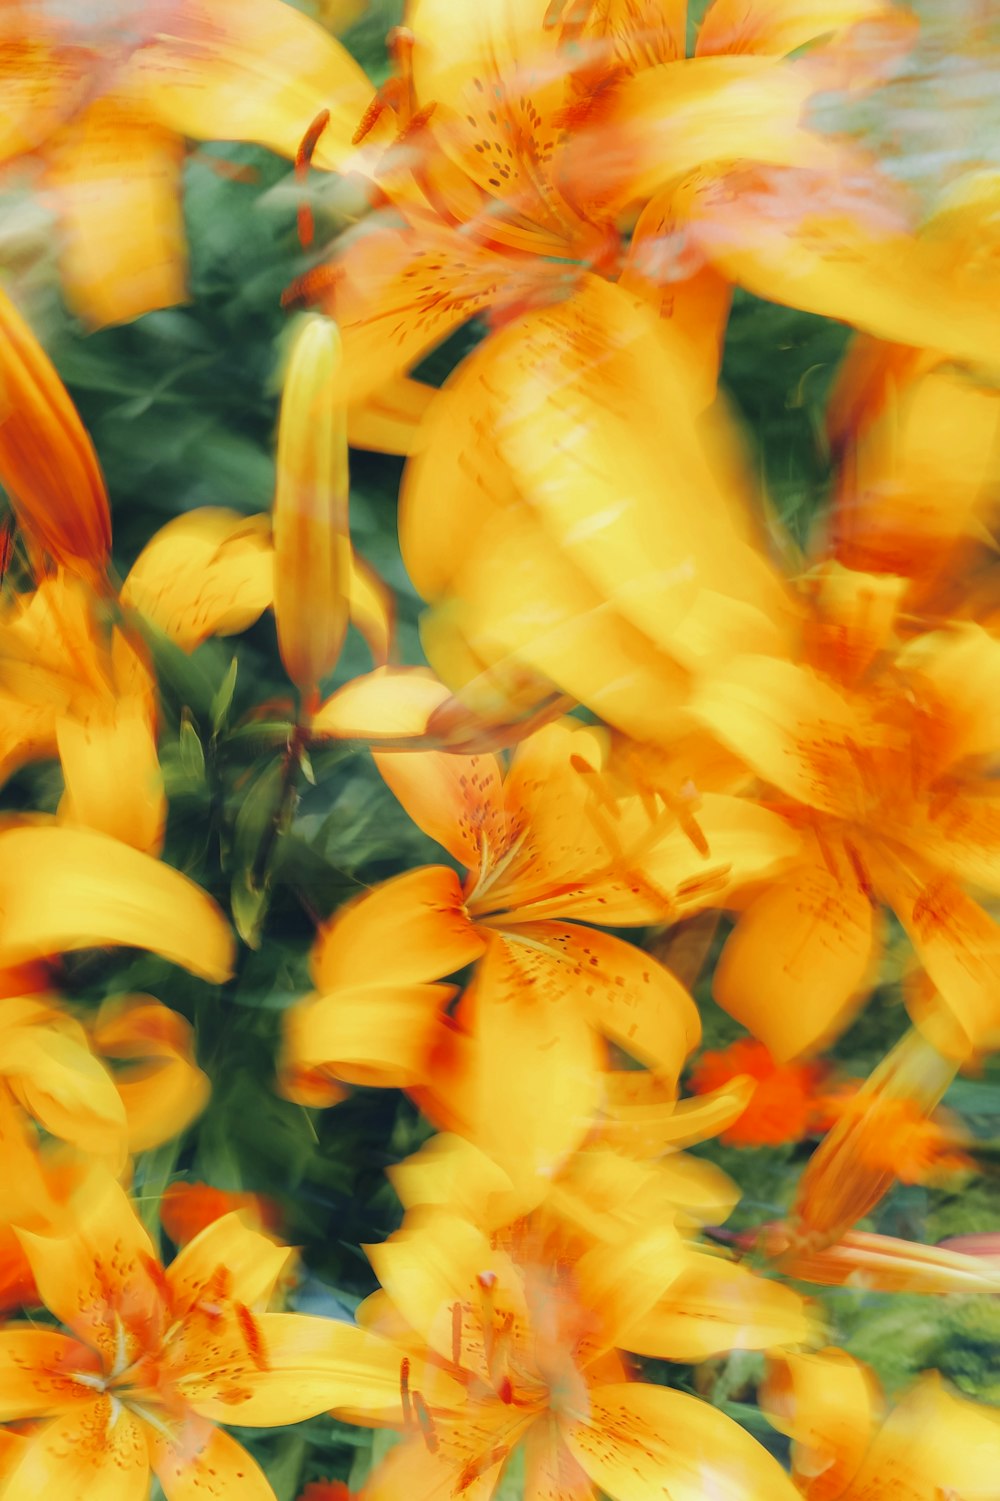 a blurry photo of yellow flowers with green leaves